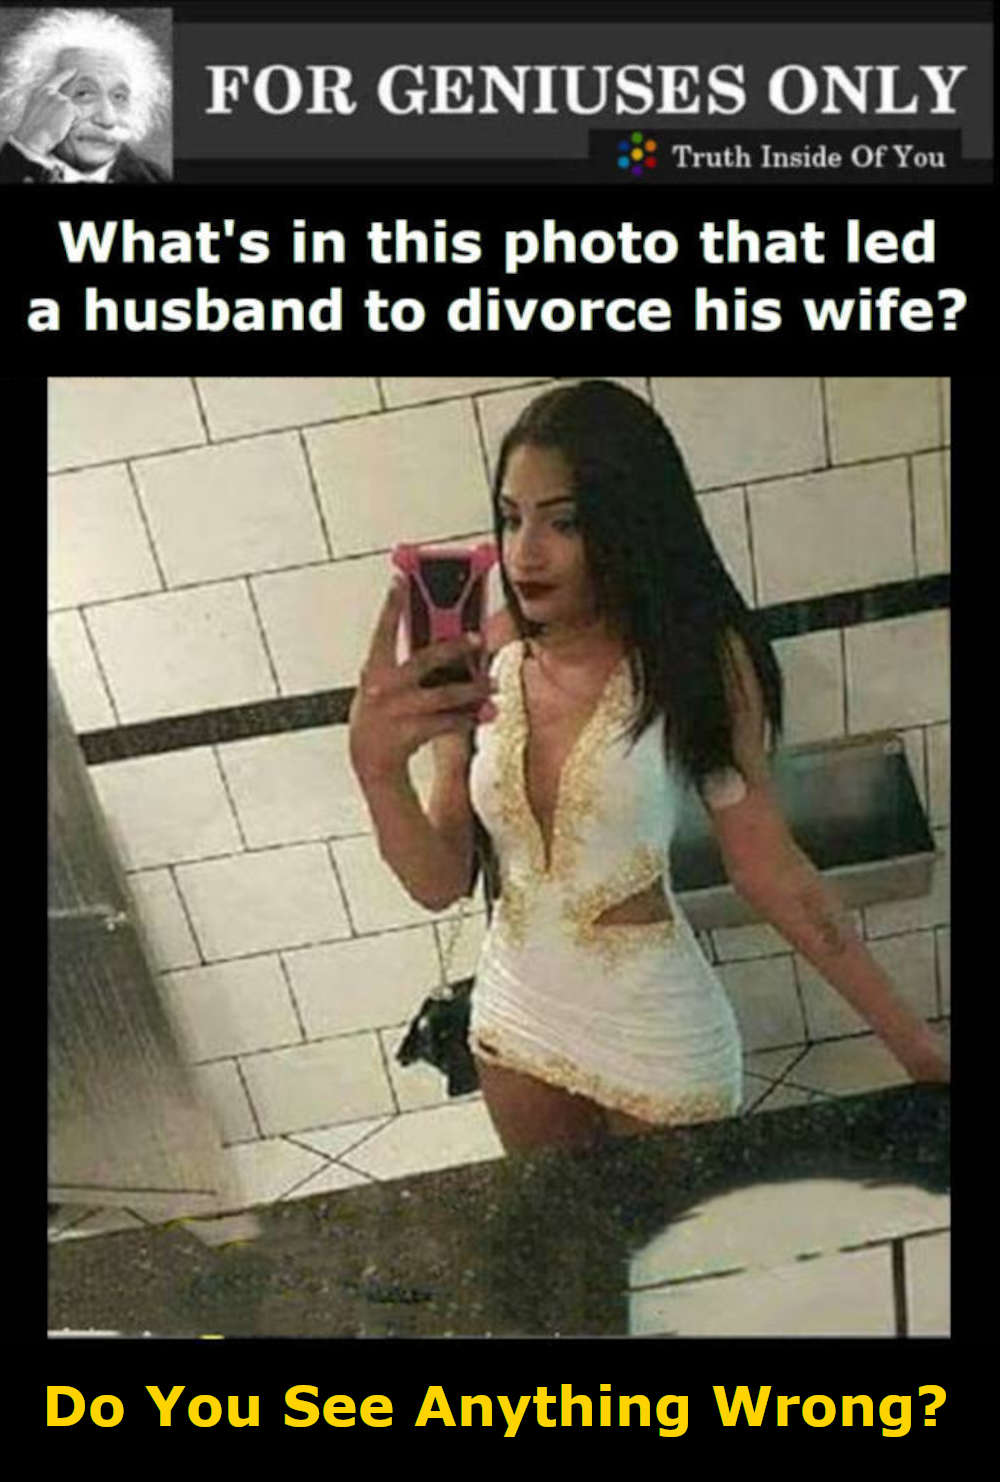 WIFE RIDDLE